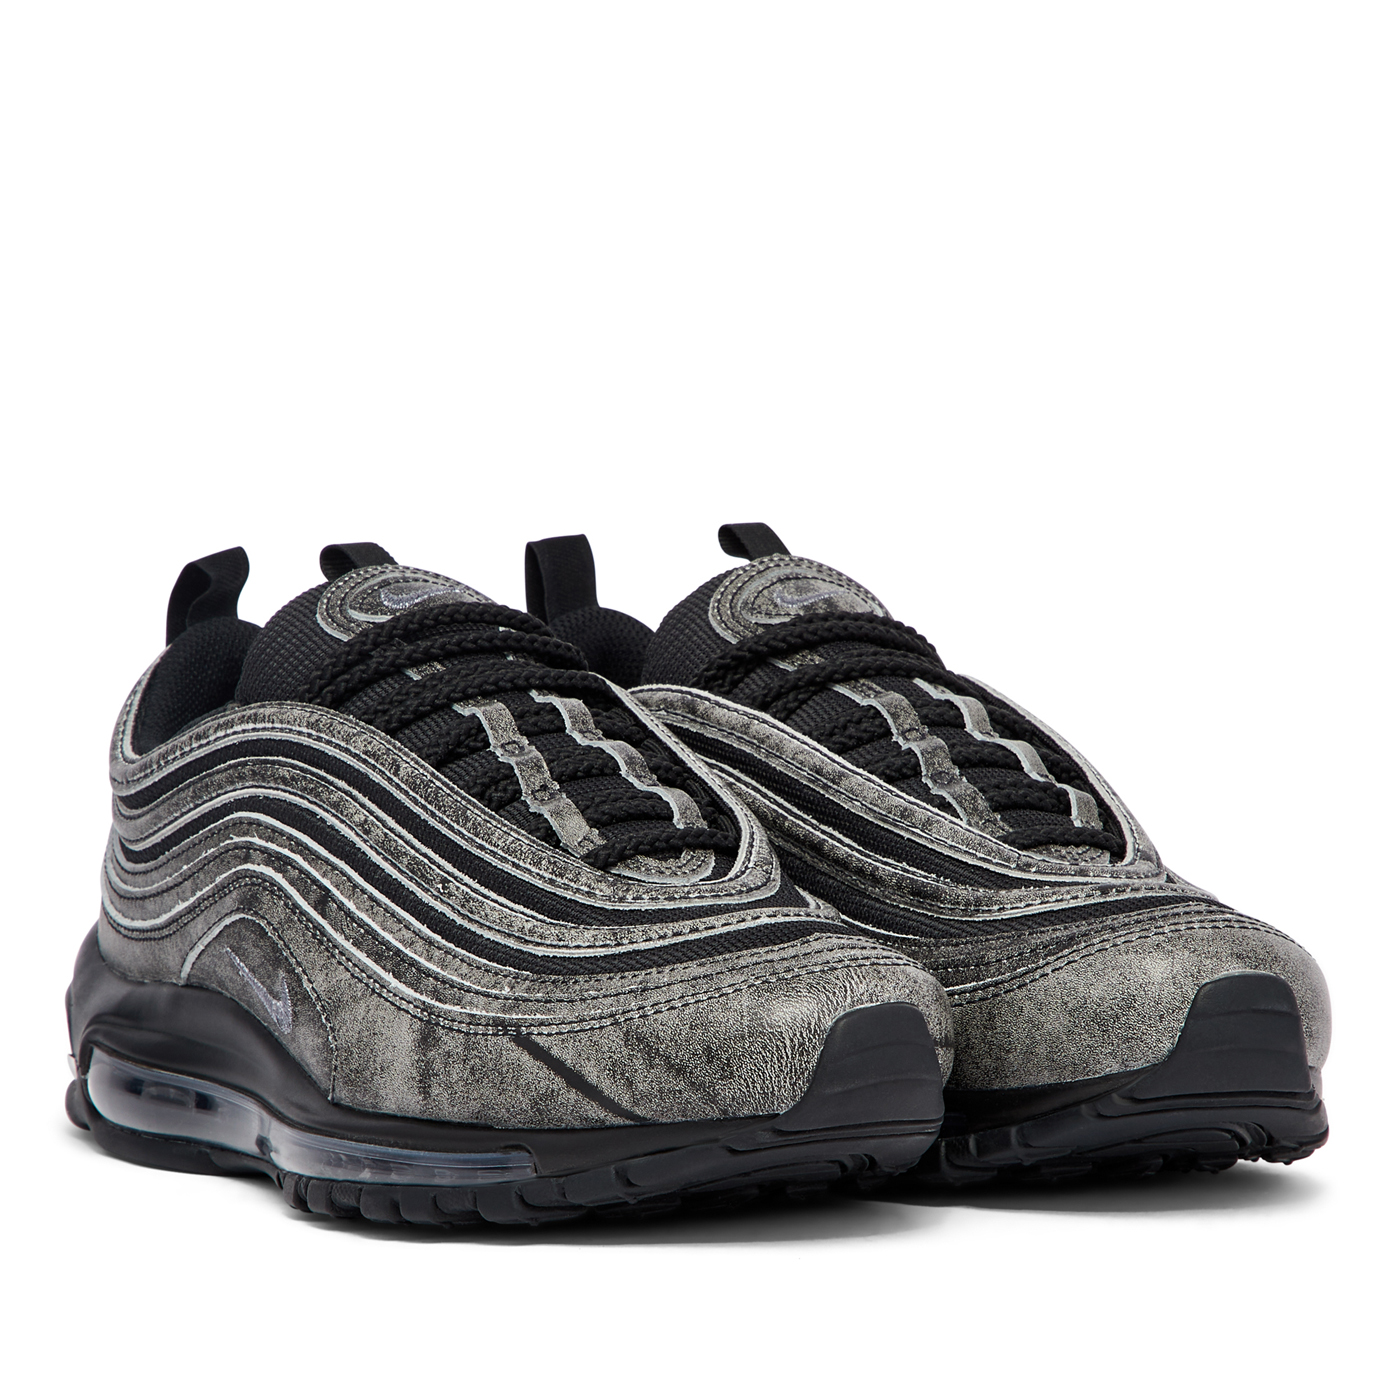 cdg-nike-air-max-97-release-information (14)